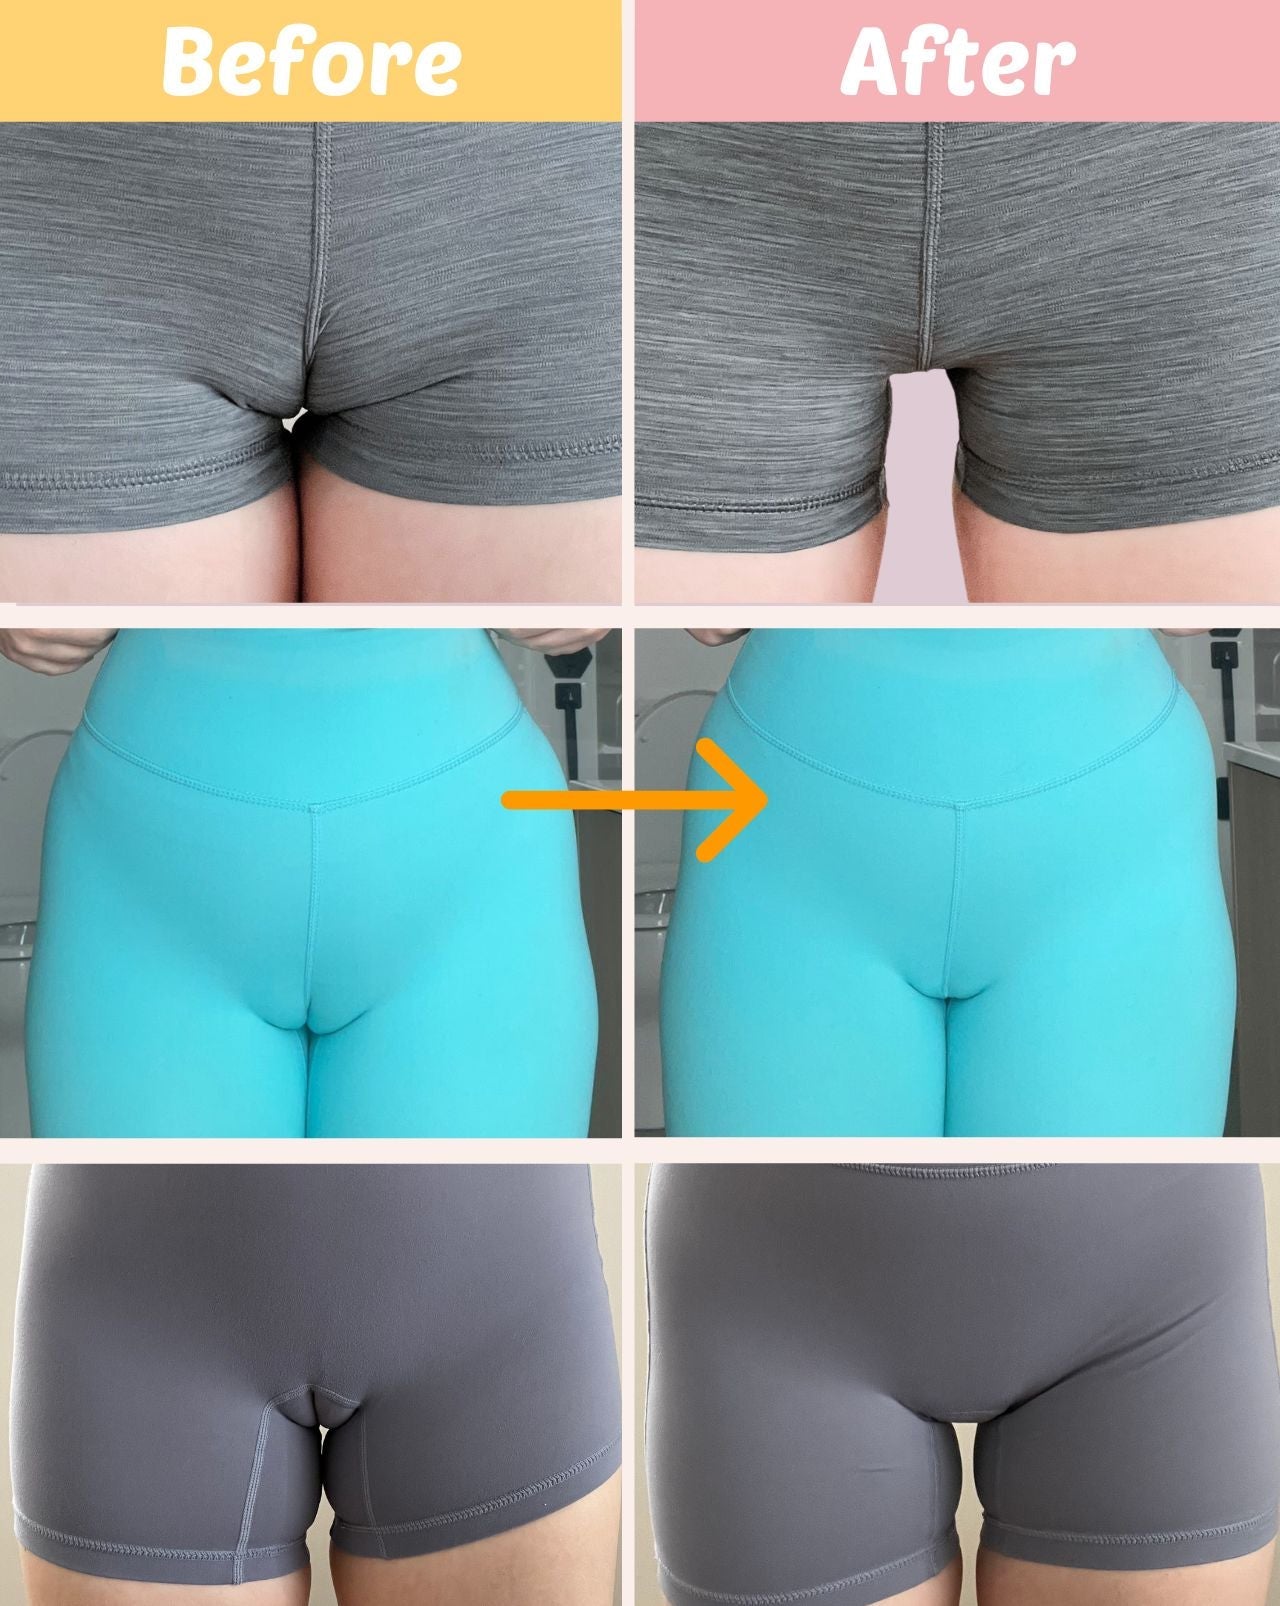 (PRE-ORDER) Fredgies: Front-Wedgie Proof Thong - V-waist